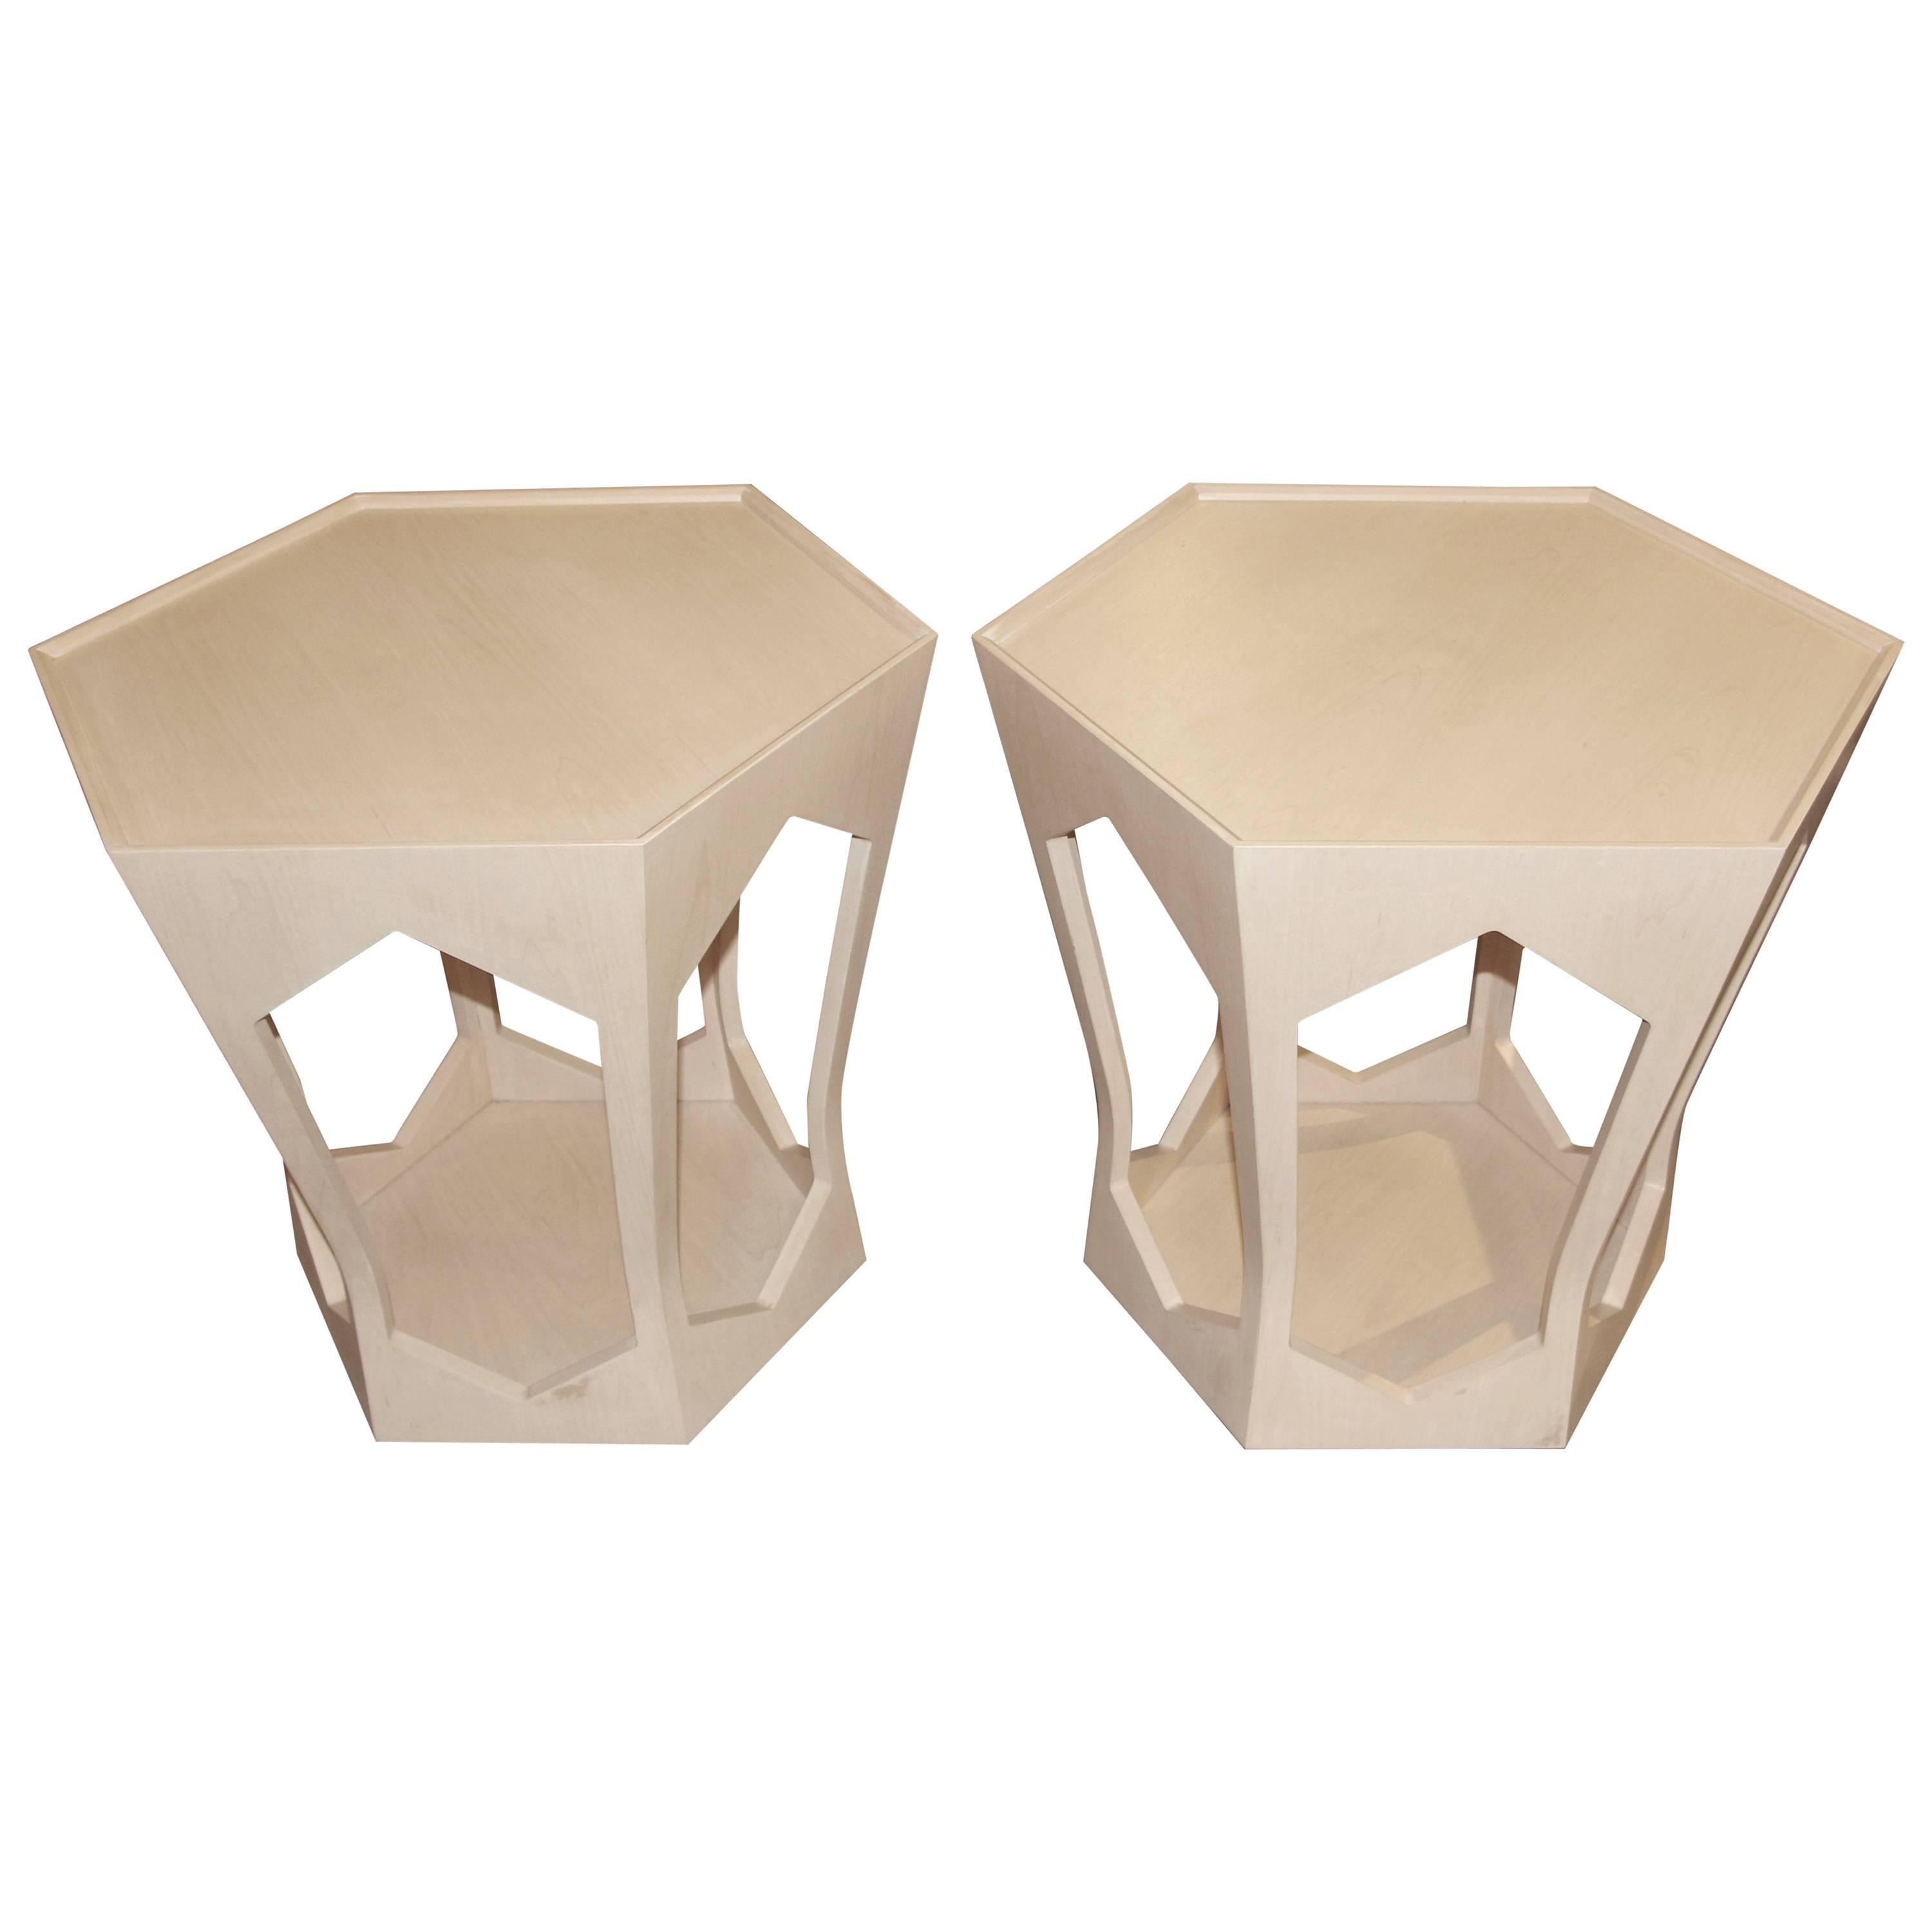 Pair of Hexagon 6 Sided Geometric Donghia Tables in Light Wood